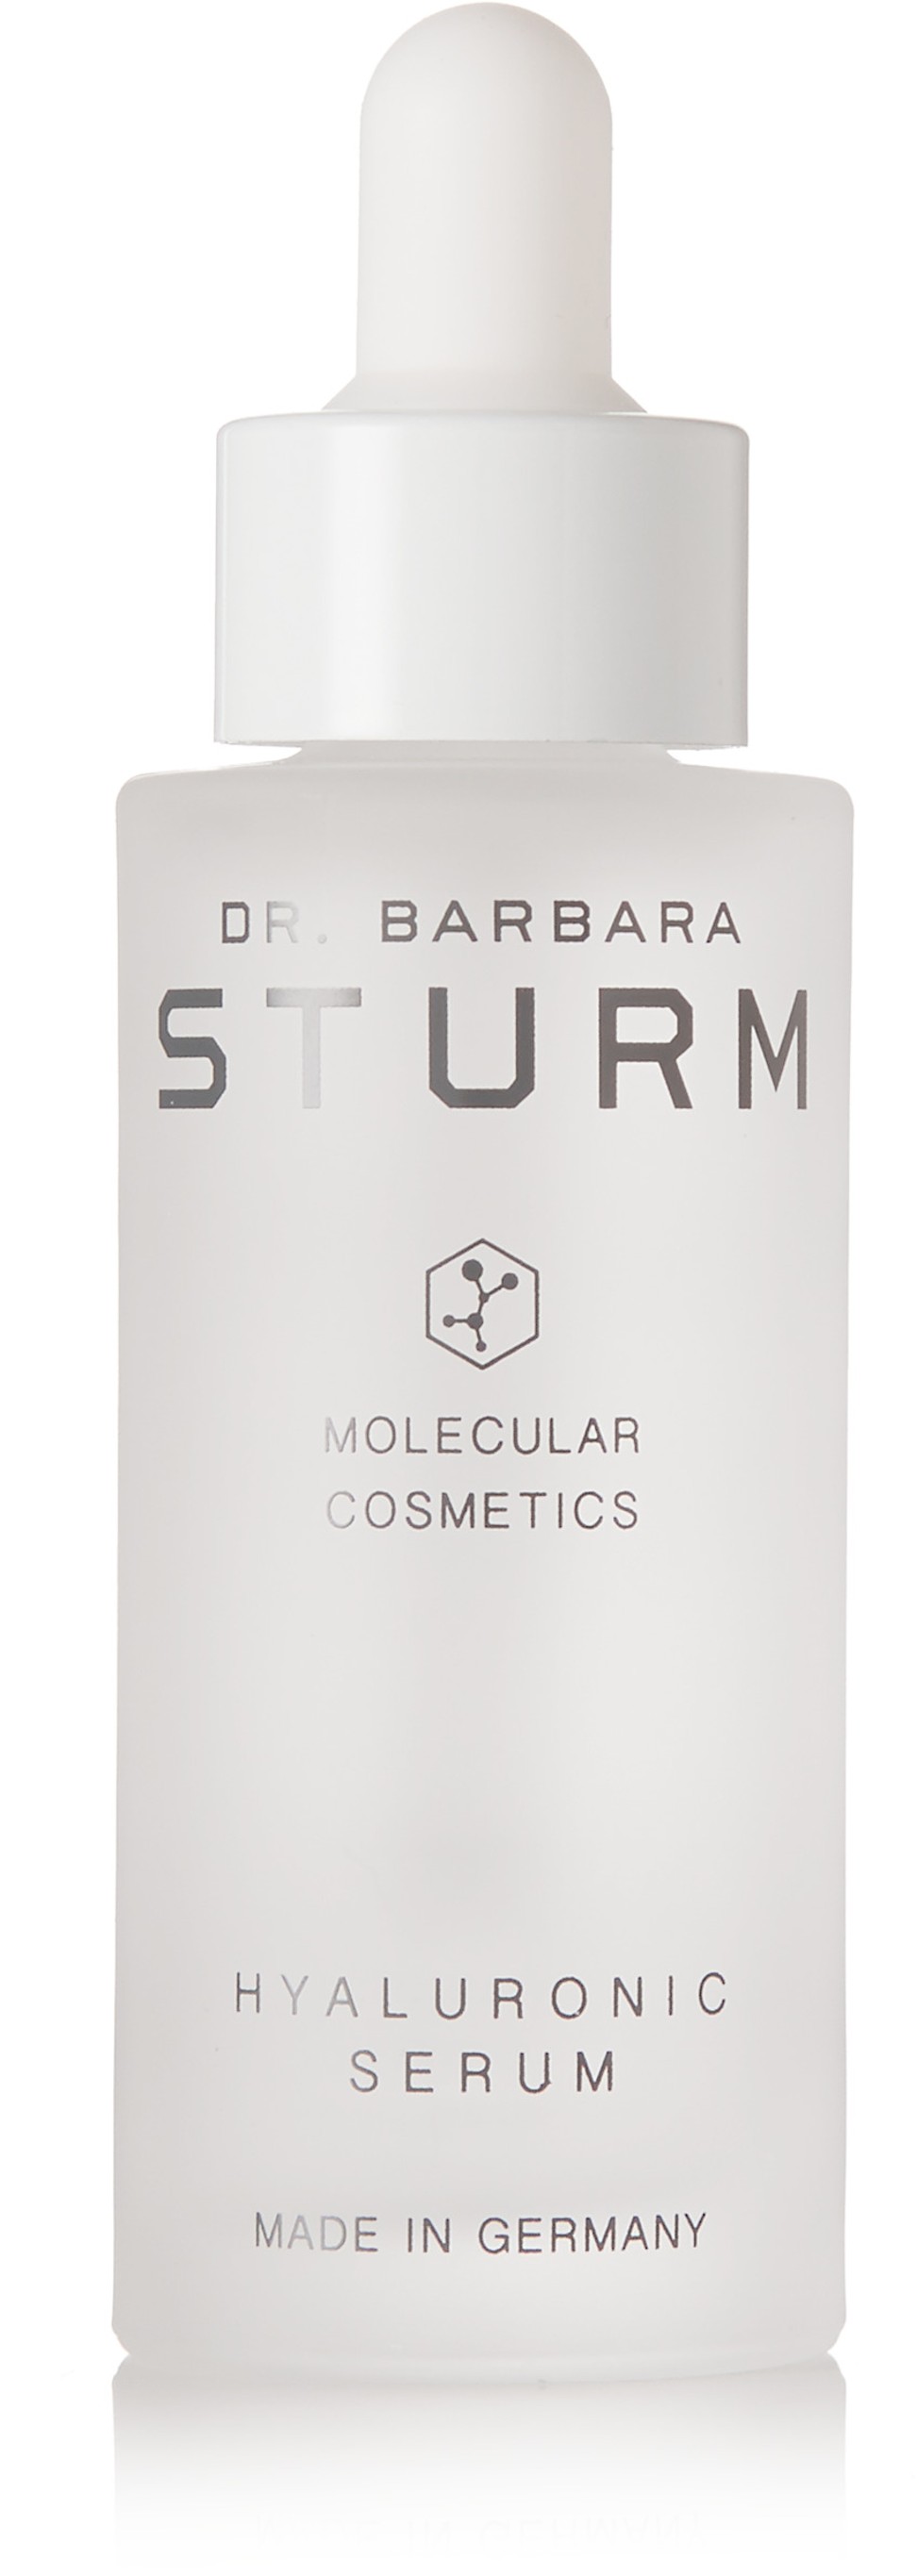 Dr Barbara Sturm’s Hyaluronic Serum offers a highly effective means of preventing wrinkles caused by dehydration.